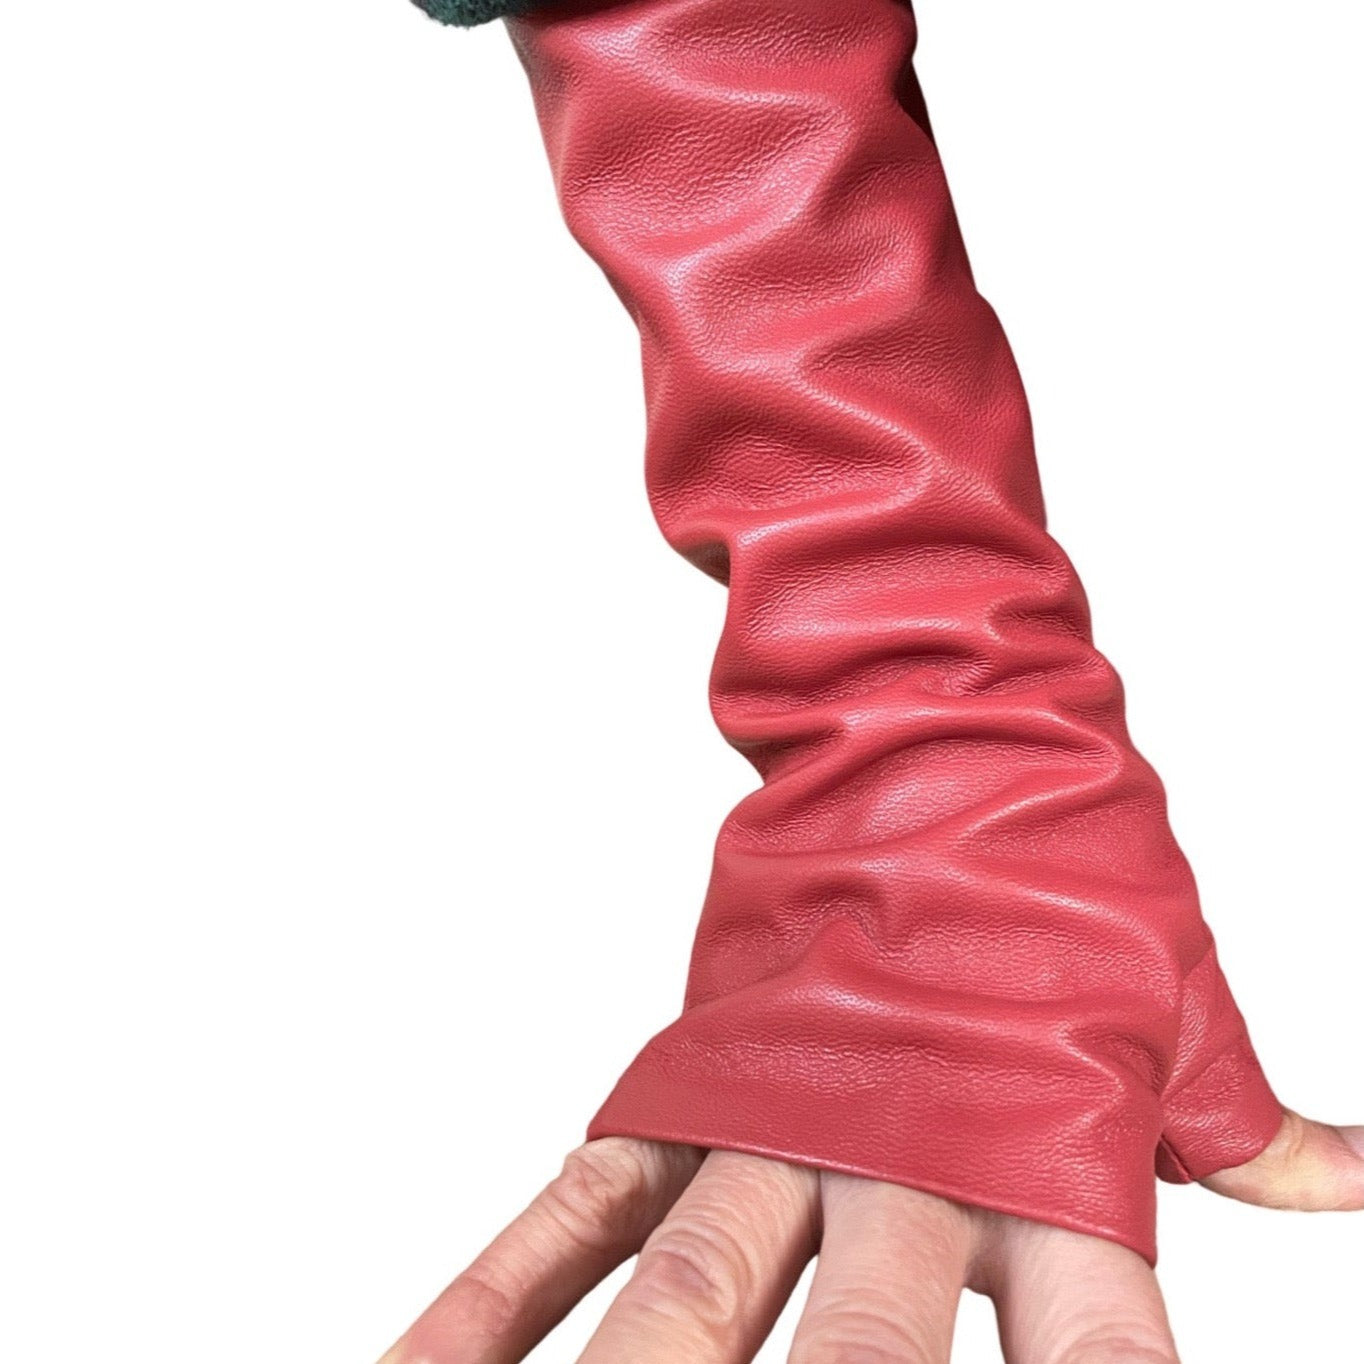 Rose long leather Gloves Handmade Accessories